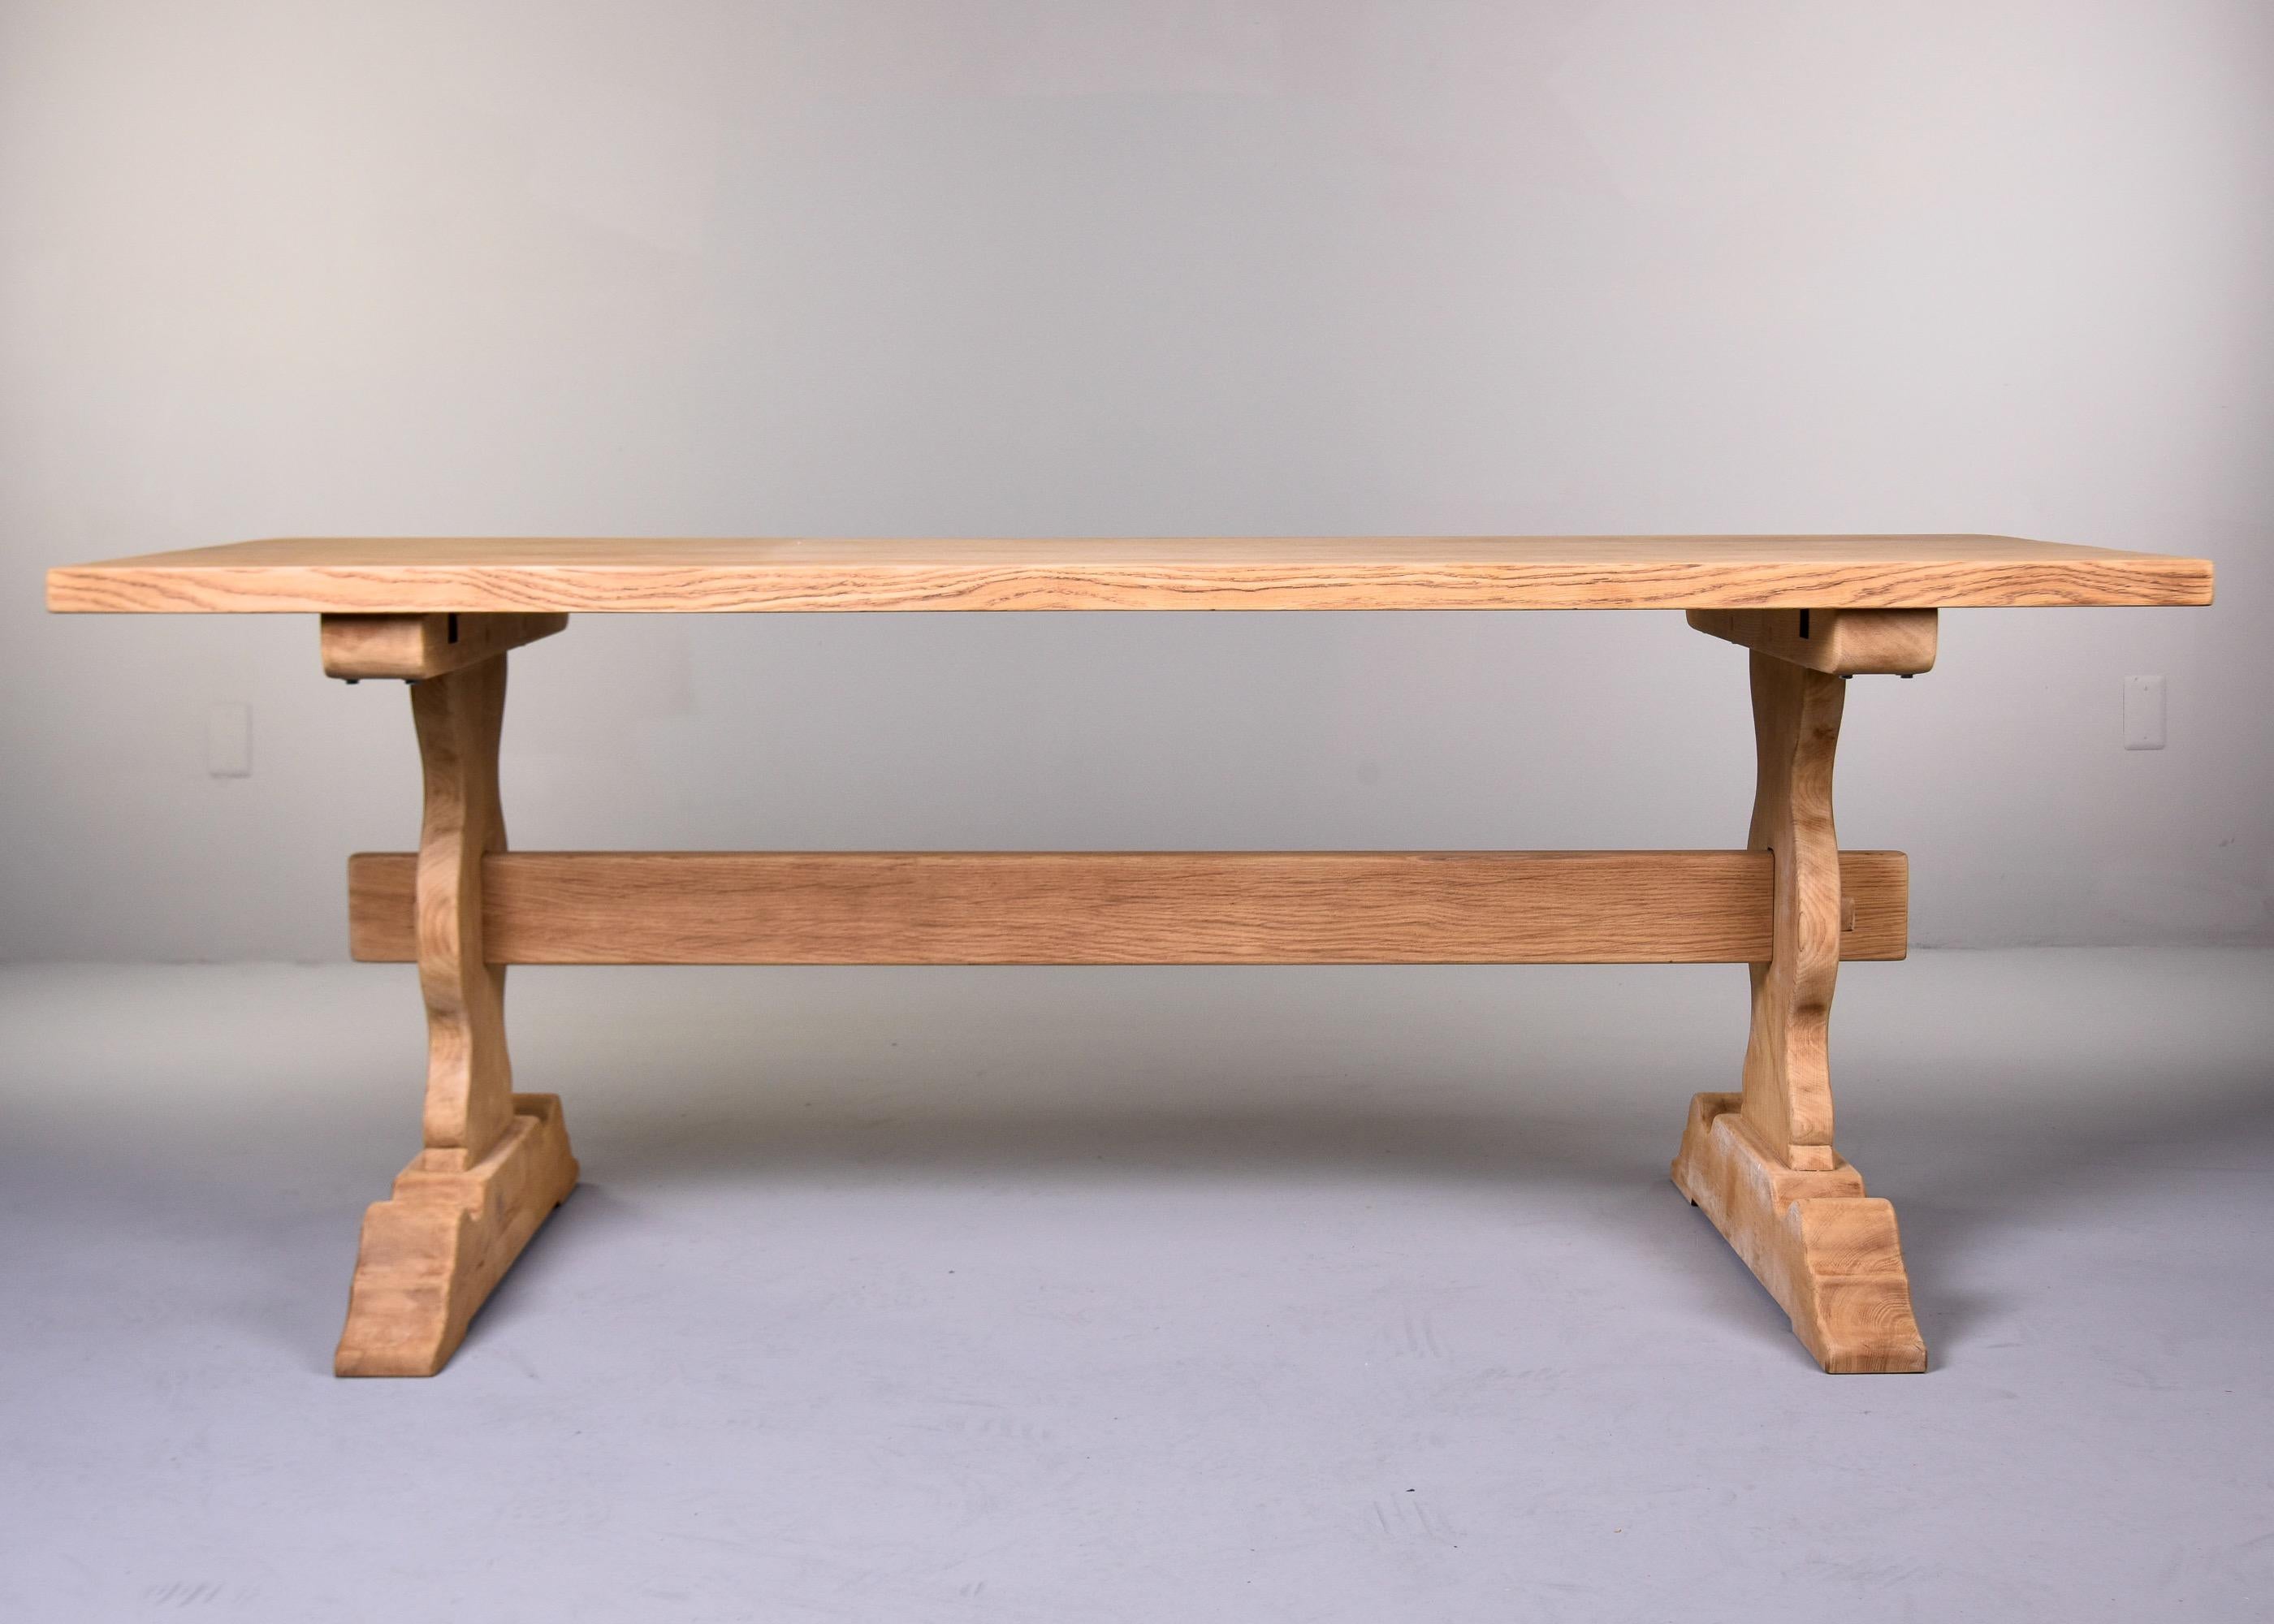 Circa 1900 French Bleached and Bare Sanded Trestle Table For Sale 7